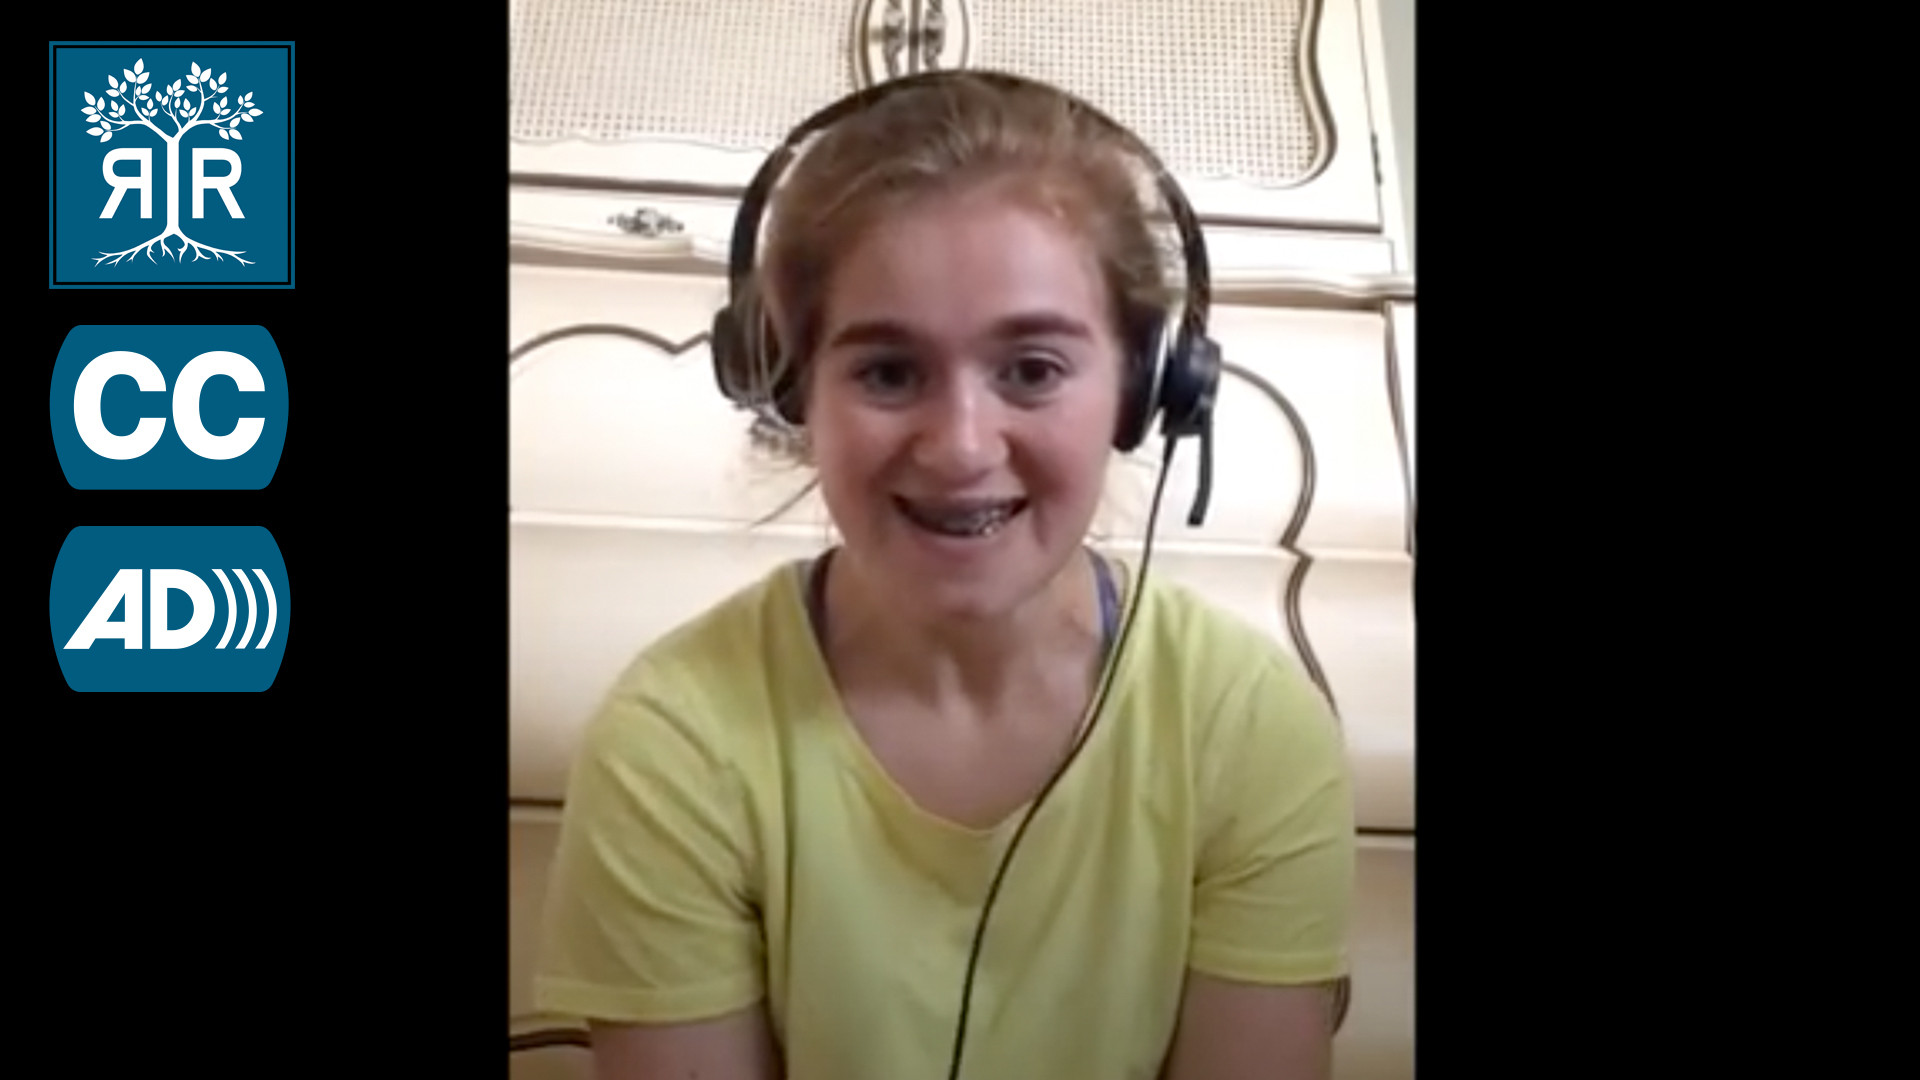 Clarice smiles while smiling to camera. She is wearing headphones with a mic.